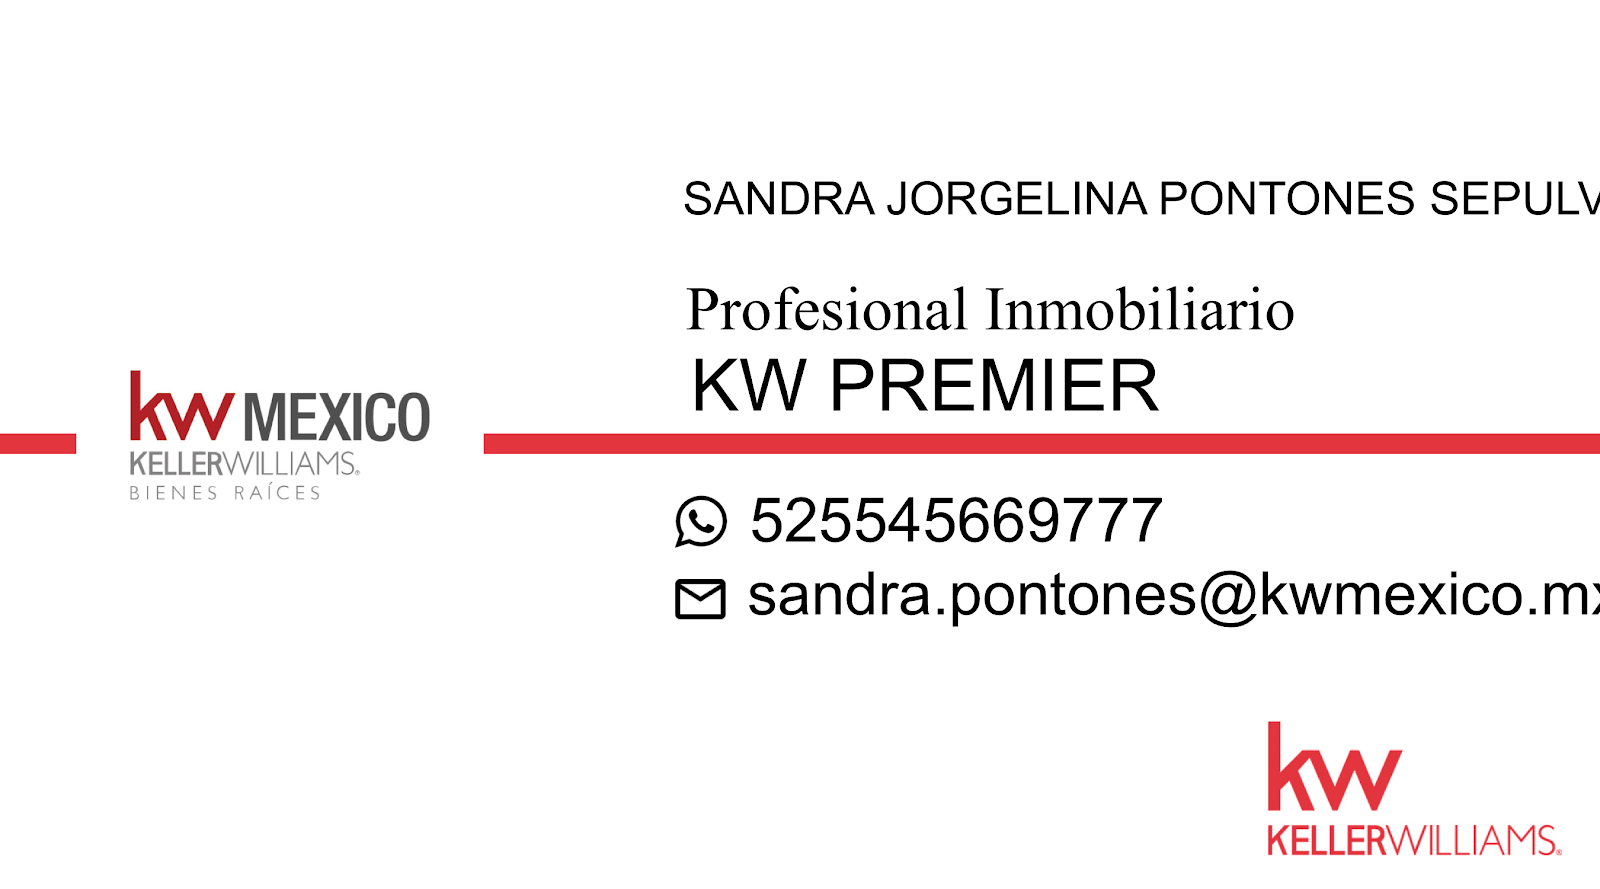 Business Card agent